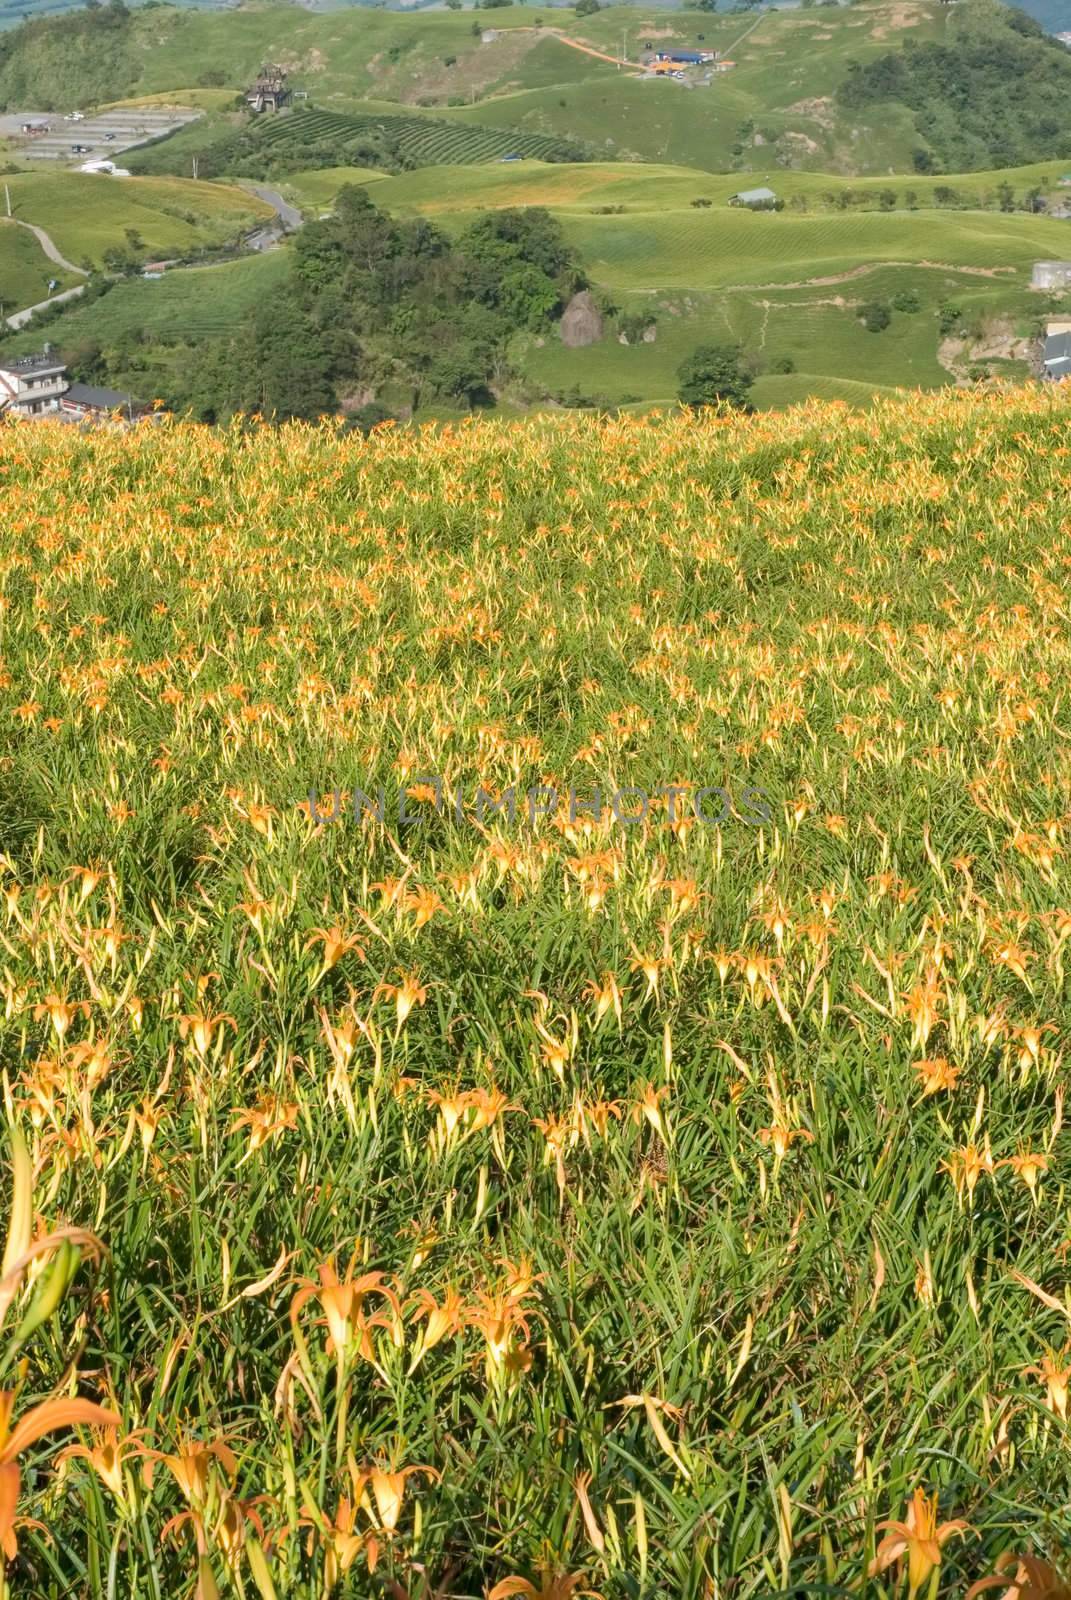 It is beautiful and colorful tiger lily farm.